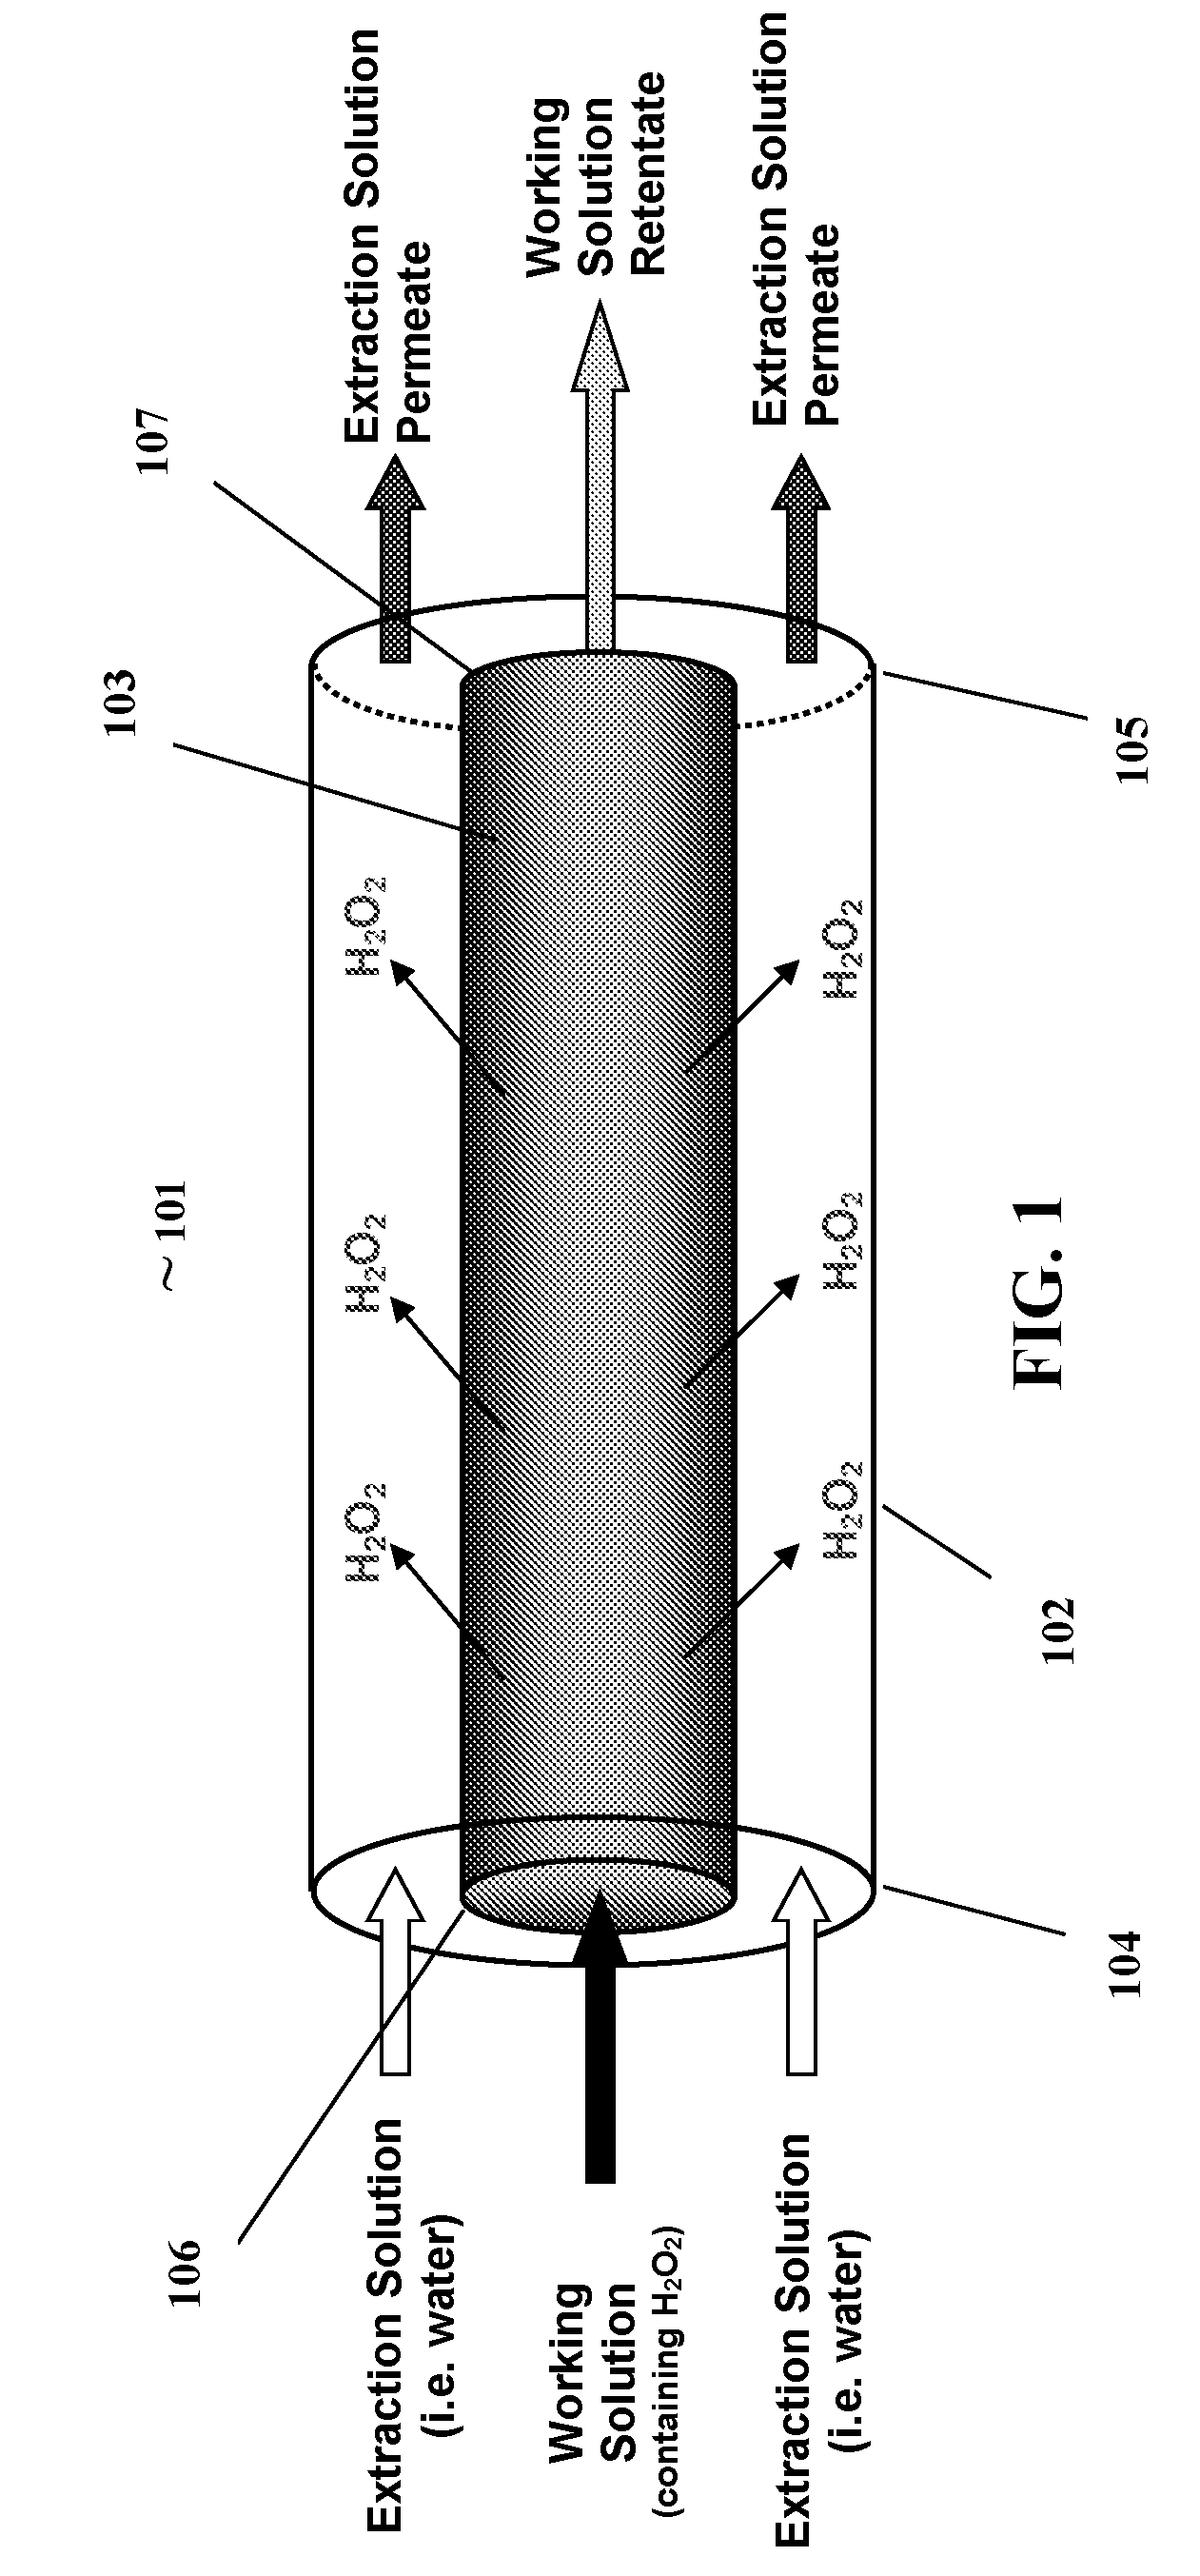 Membrane contactor assisted water extraction system for separating hydrogen peroxide from a working solution, and method thereof